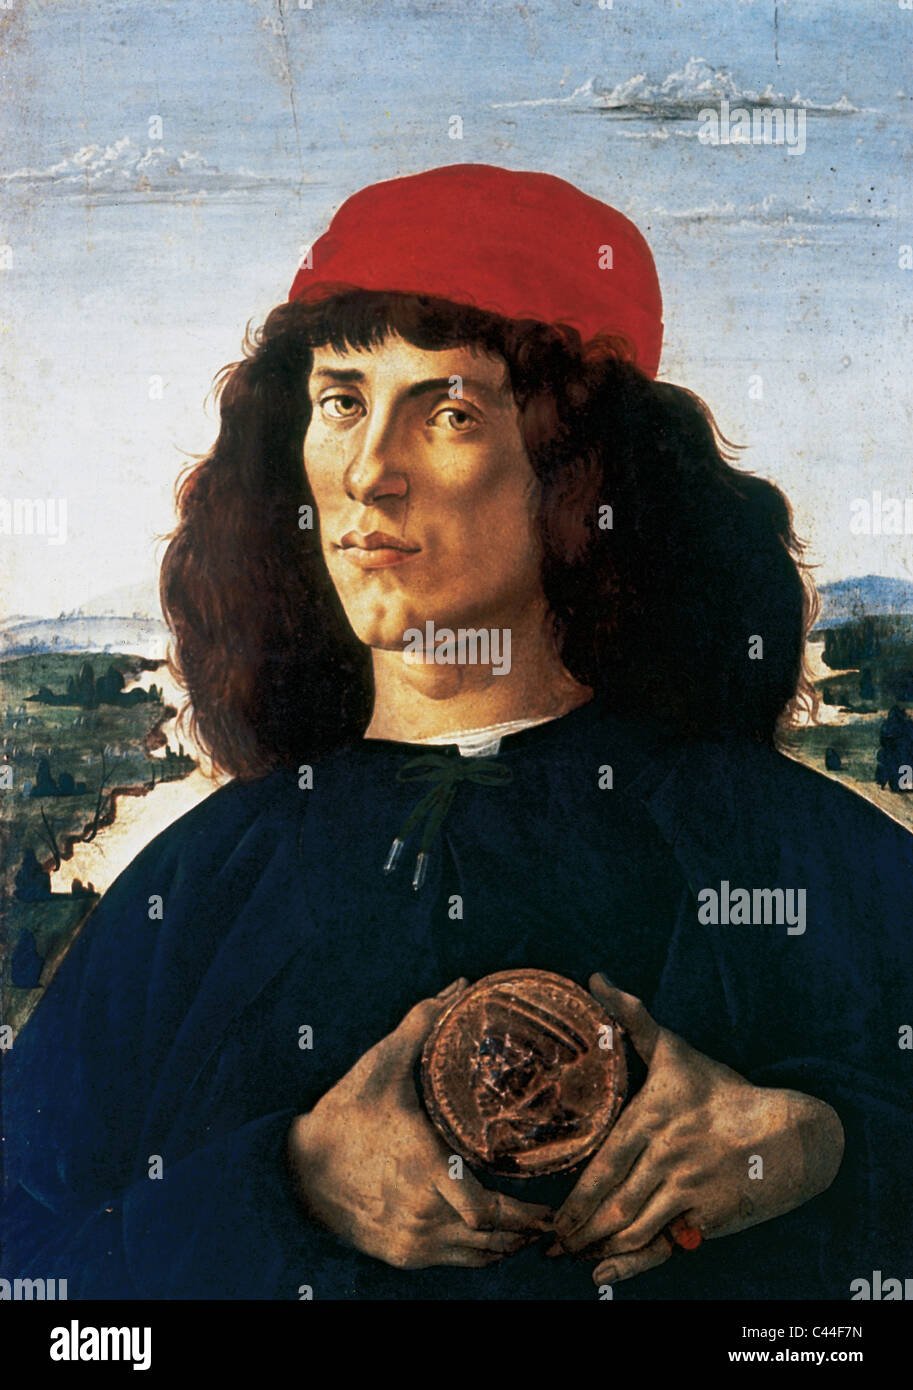 Sandro Botticelli (1445-1510). Portrait of a man with a medal of Cosimo the Elder (1475-1476). Uffizi Gallery. Florence. Italy. Stock Photo